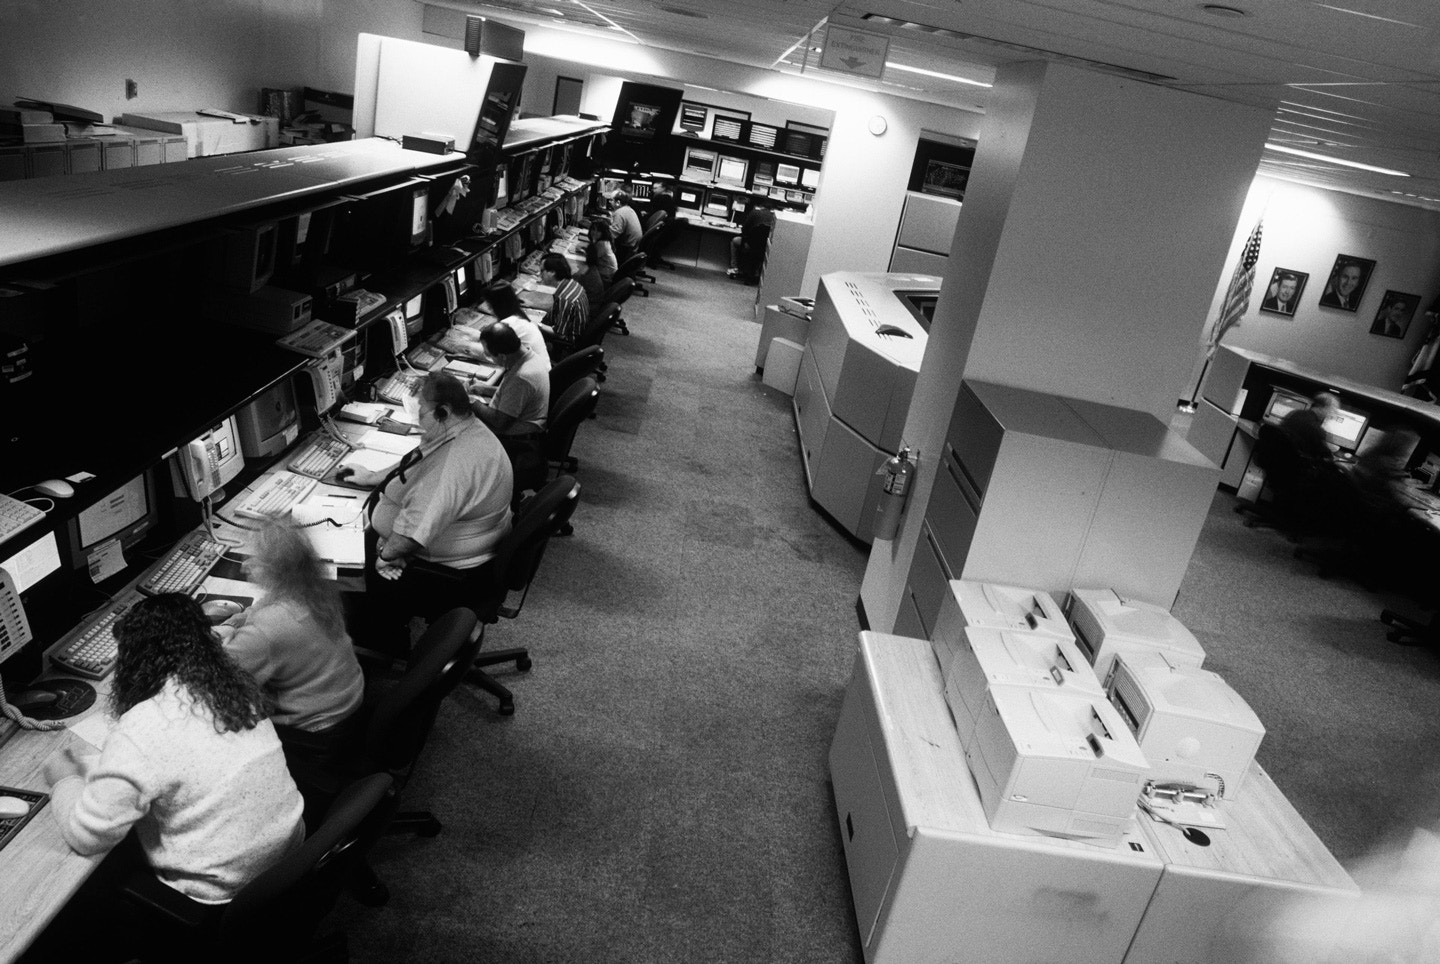 Workers, many from the nearby town of Clarksburg, analyze data to help track criminals. At the FBI's Criminal Justice Information Services Division headquarters, tucked away in the West Virginia hills near Clarksburg, some 3,000 employees quietly fight crime with a sophisticated computer network and access to the largest repository of fingerprints in the world.